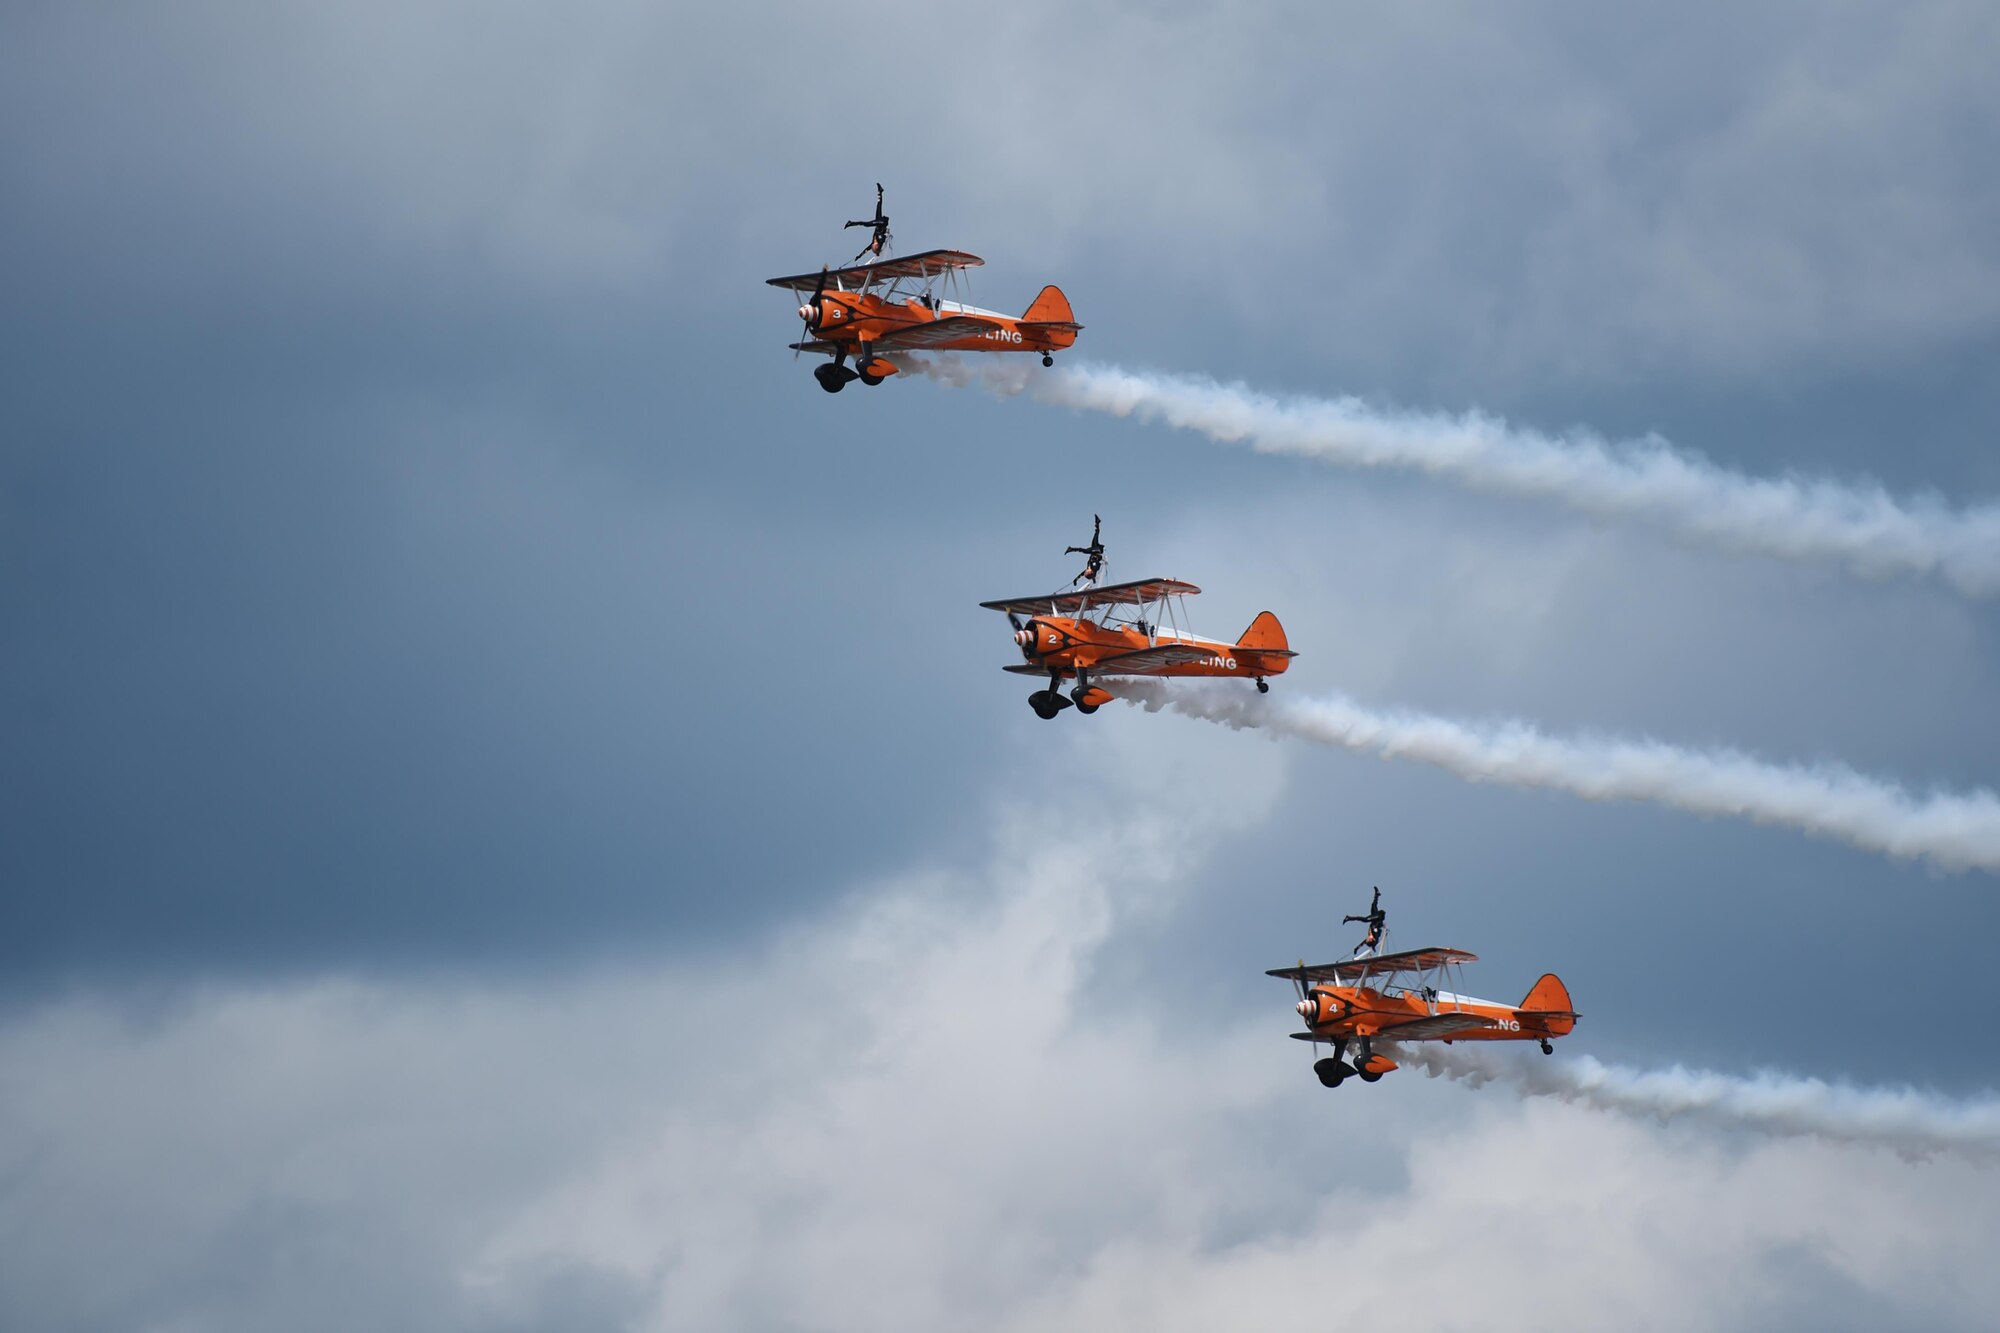 Wing walkers perform at the 2016 Royal International Air Tattoo, held on RAF Fairford, United Kingdom, June 8-10, 2016. RIAT 16 afforded an opportunity for new aircraft, like the F-35 Lightning II, to be displayed alongside crowd favorites and provided a weekend of fun and entertainment for the projected 160,000 visitors. (U.S. Air Force photo by Airman 1st Class Zachary Bumpus/Released)